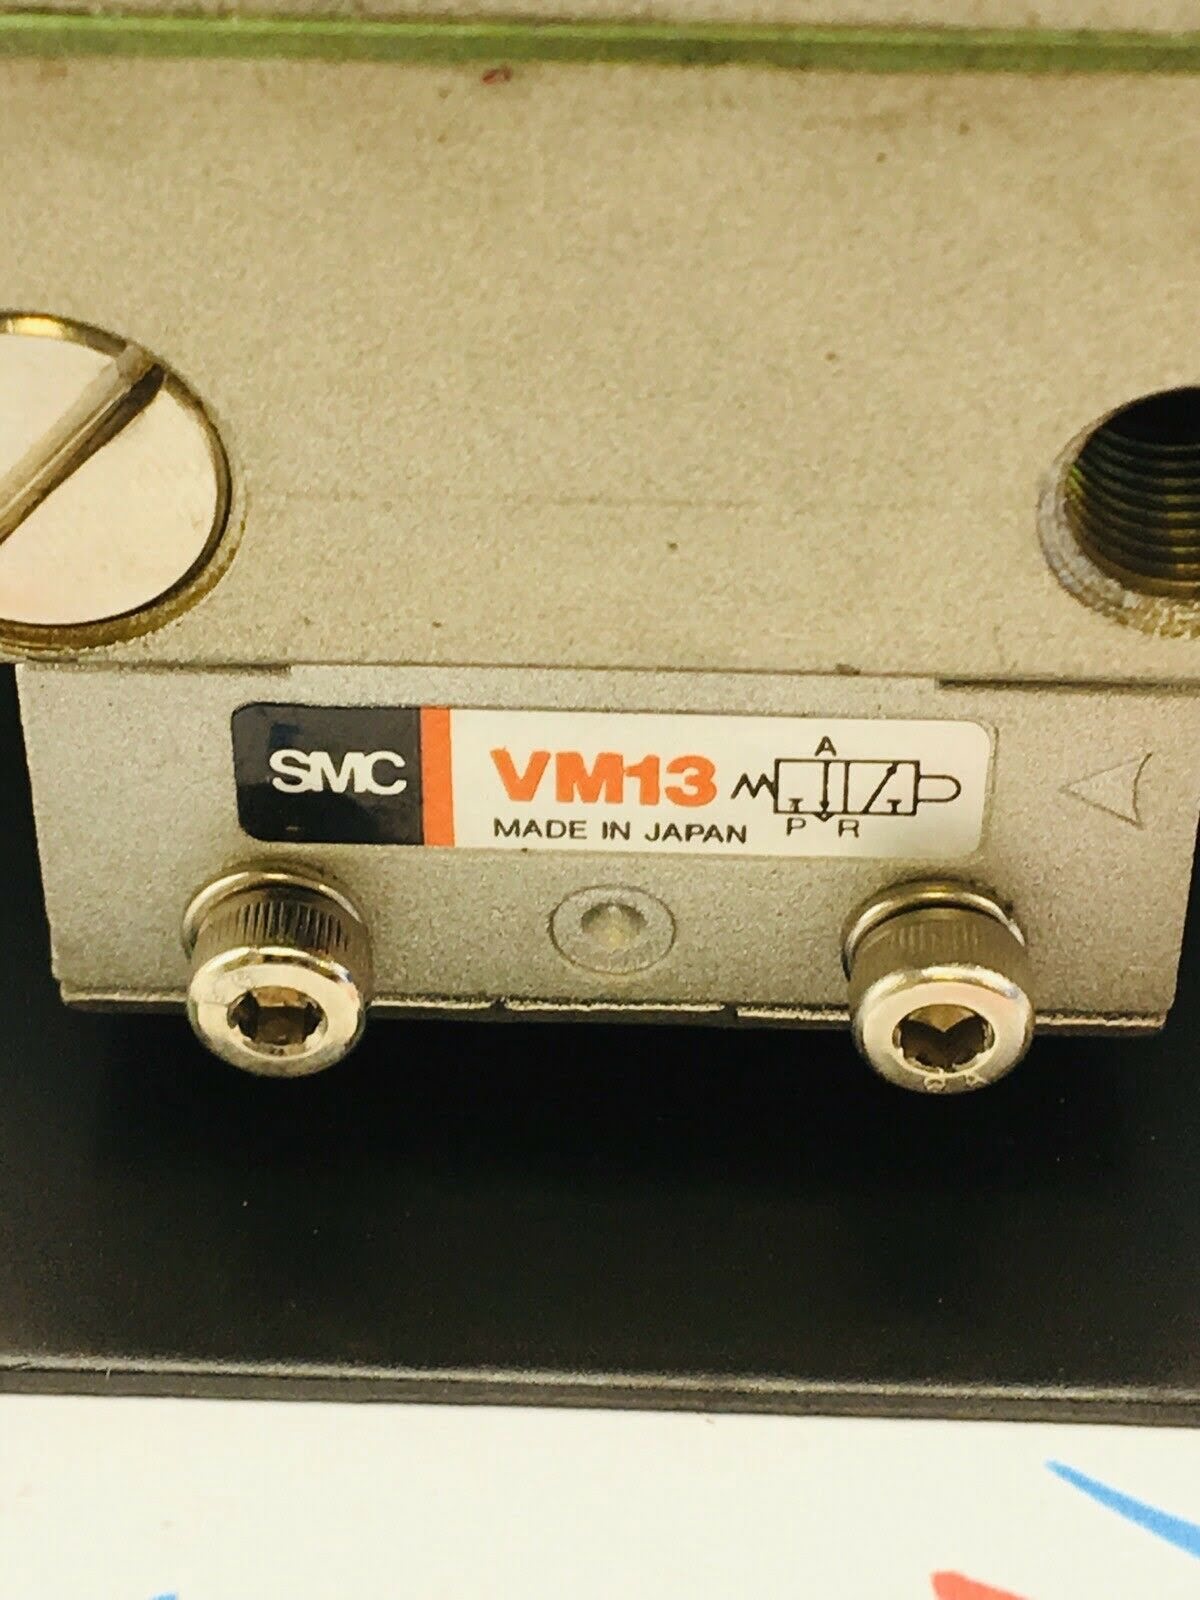 SMC Vr2110 Pneumatic Time Delay Valve With Vm13 for sale online 